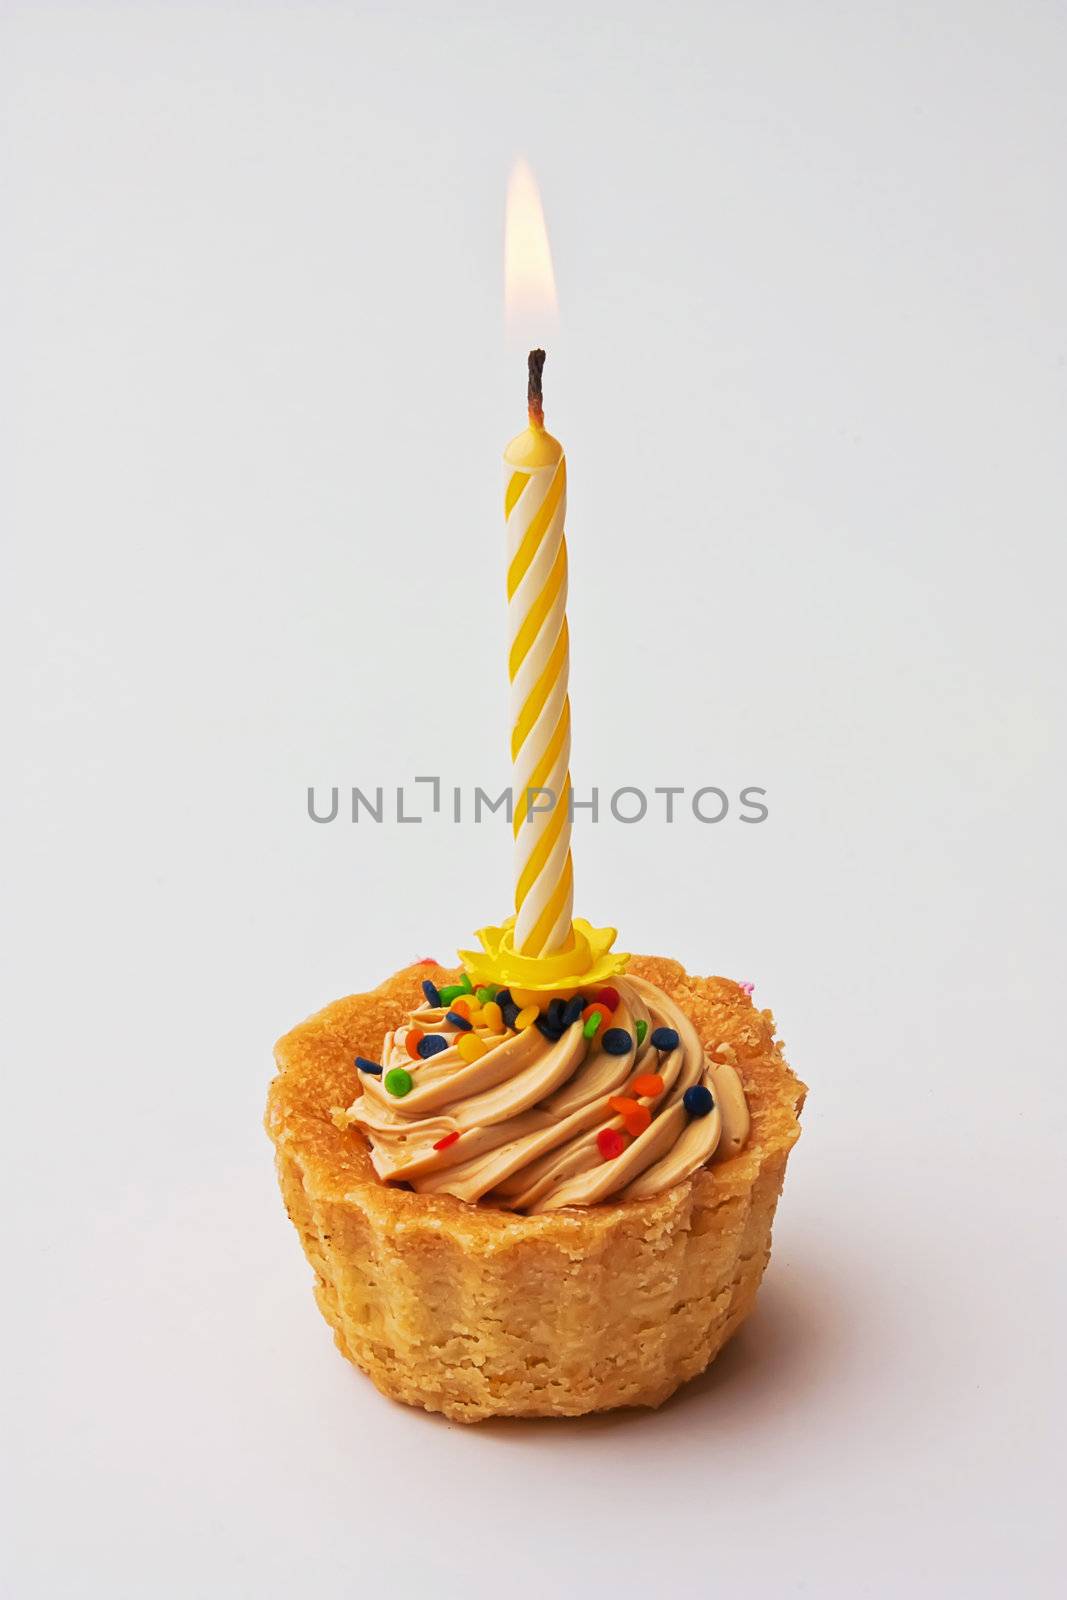 Tartlet cake with a candle